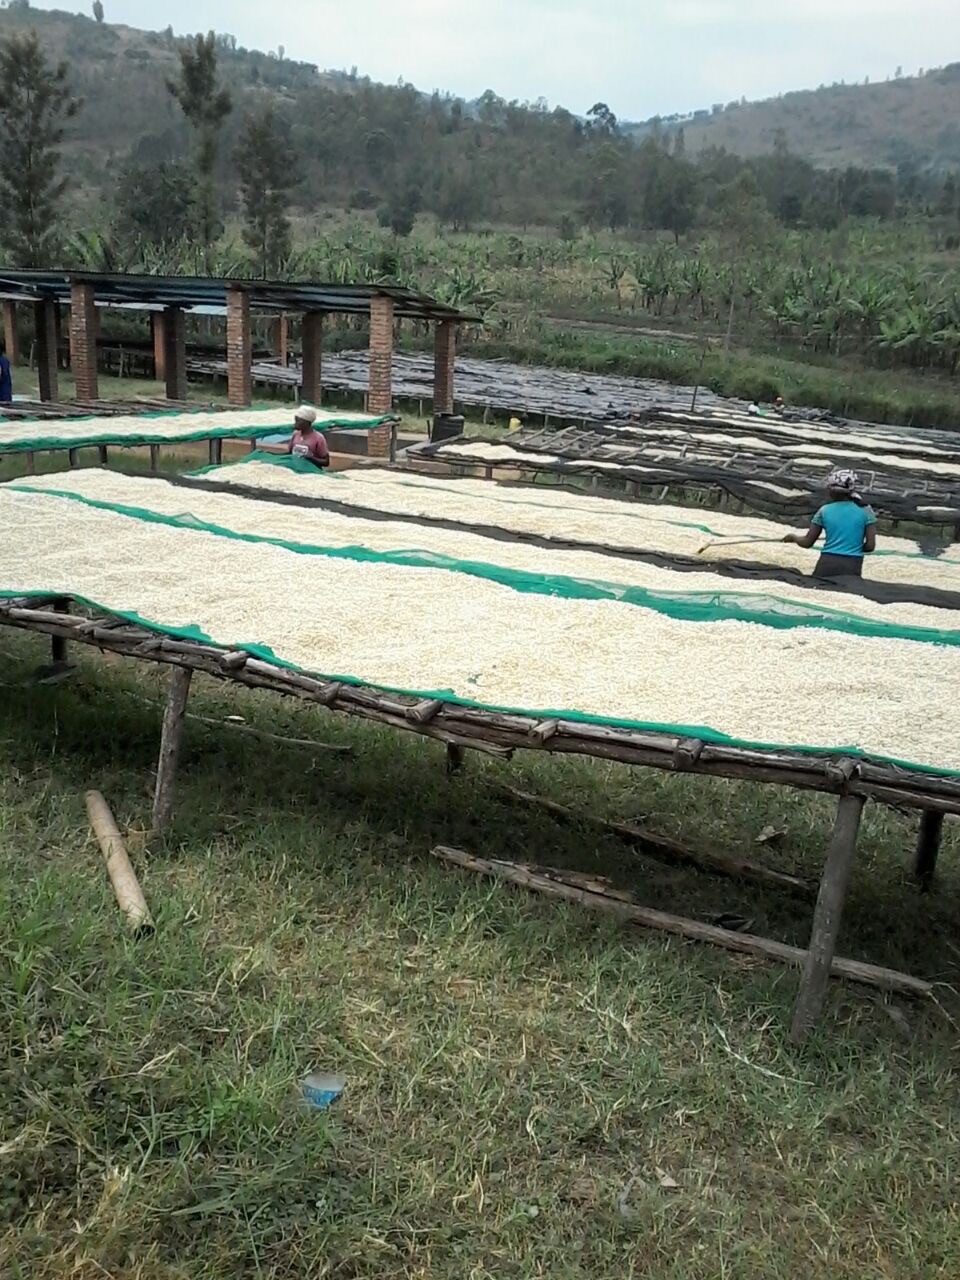 Coffee is to be dried on large beds after harvest